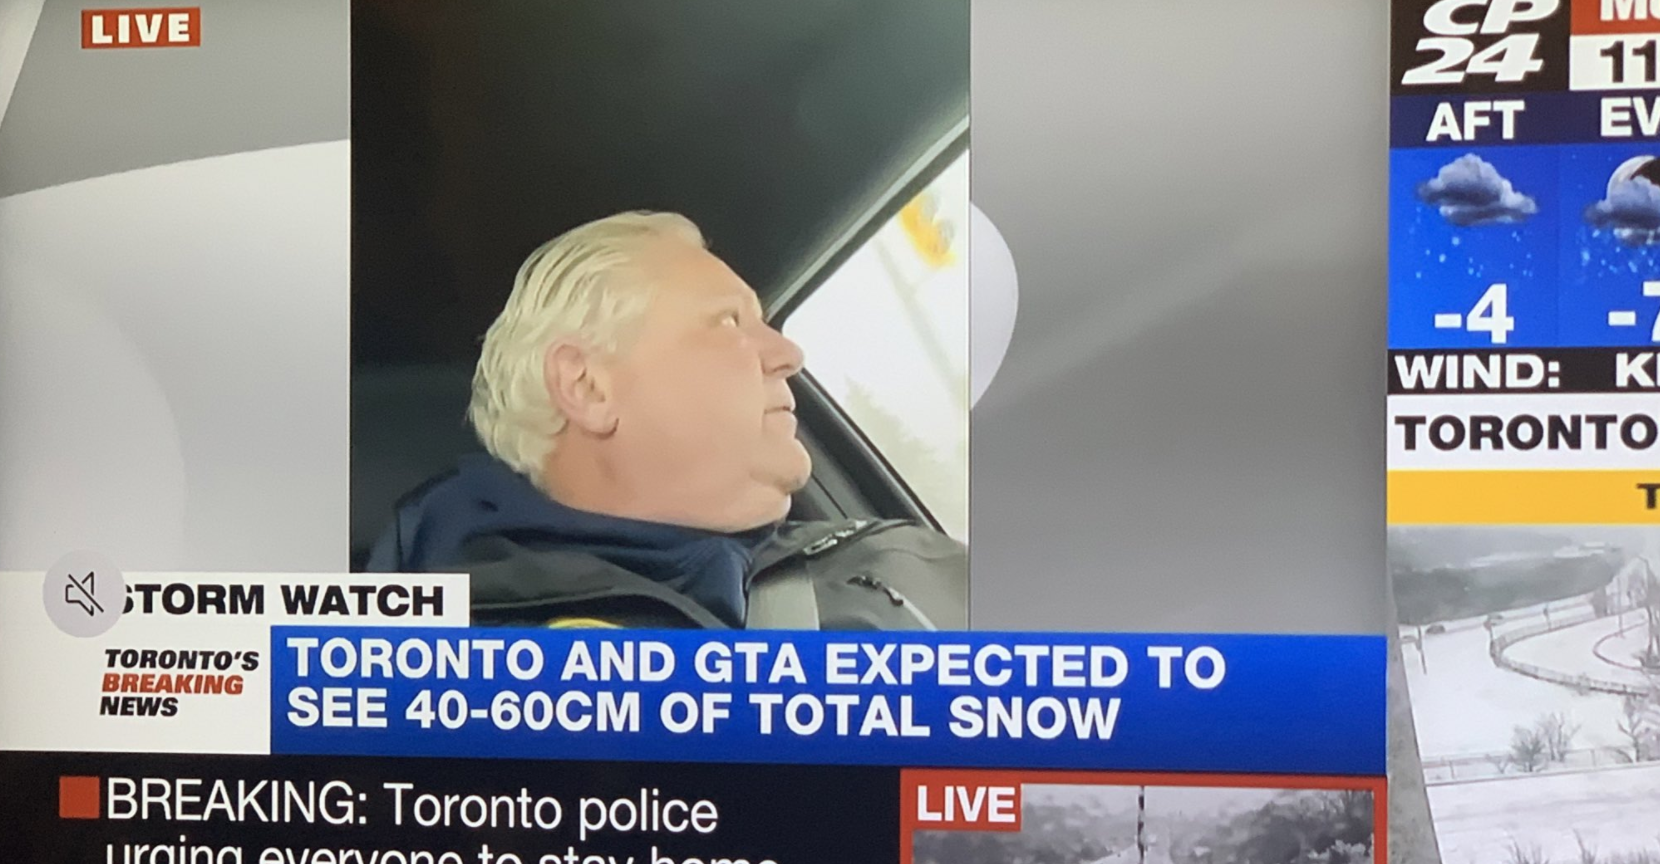 Doug Ford flouts new distracted driver law by doing FaceTime interview  while driving in snow storm